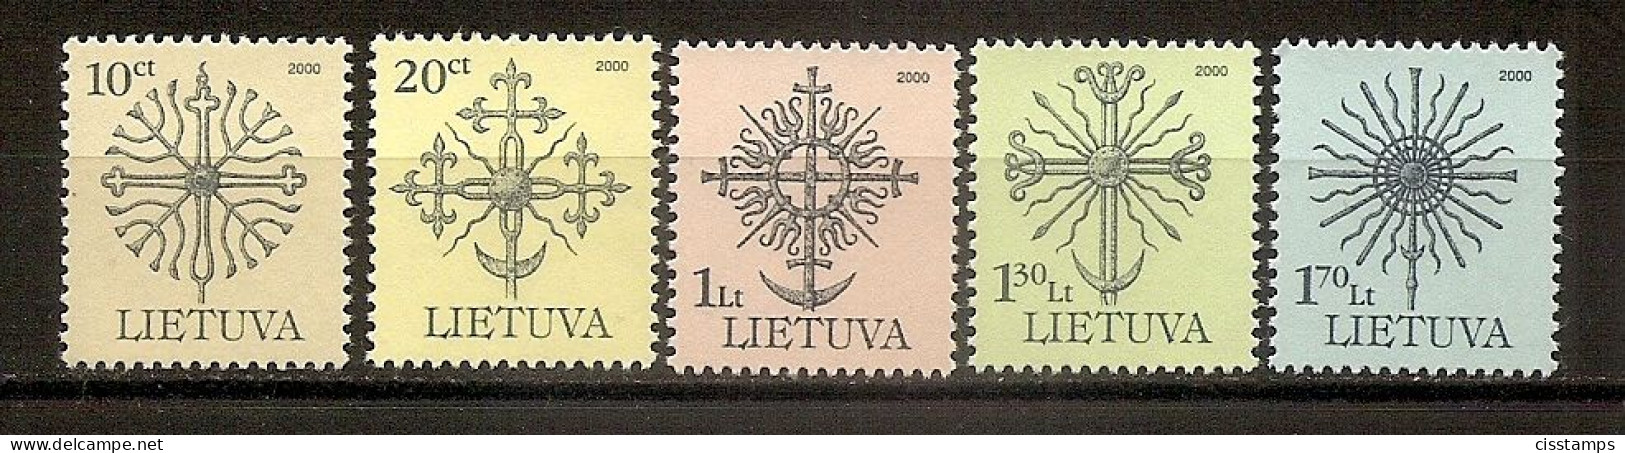 LITHUANIA 2000●Definitive●Forged Tops Of Monuments●Perf.13 3/4x 13 1/4●Size 22x26●Mi 717AI-21AI●MNH - Litauen